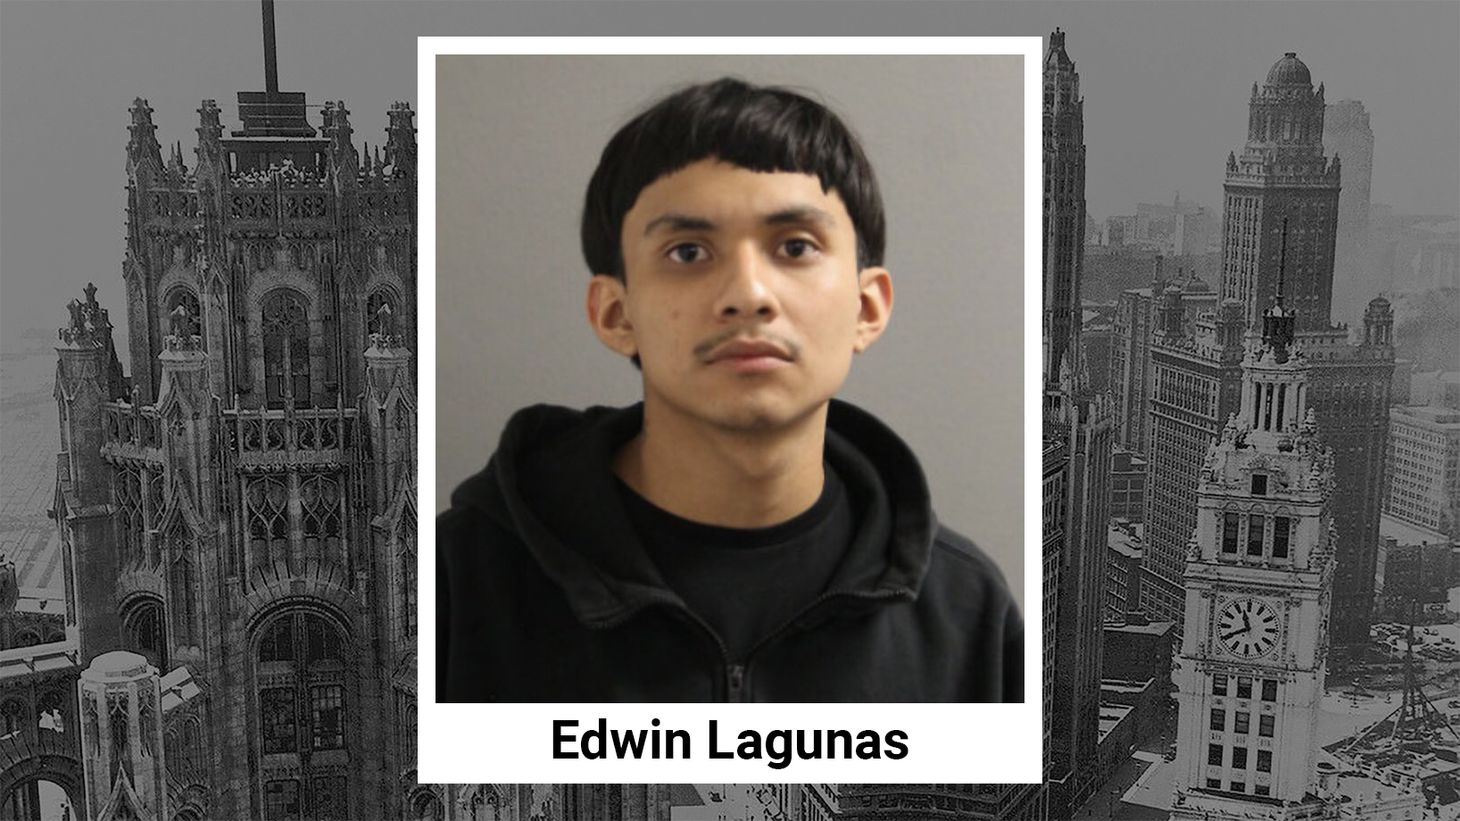 18-year-old Edgewater man charged with Austin double murder, attempted murder